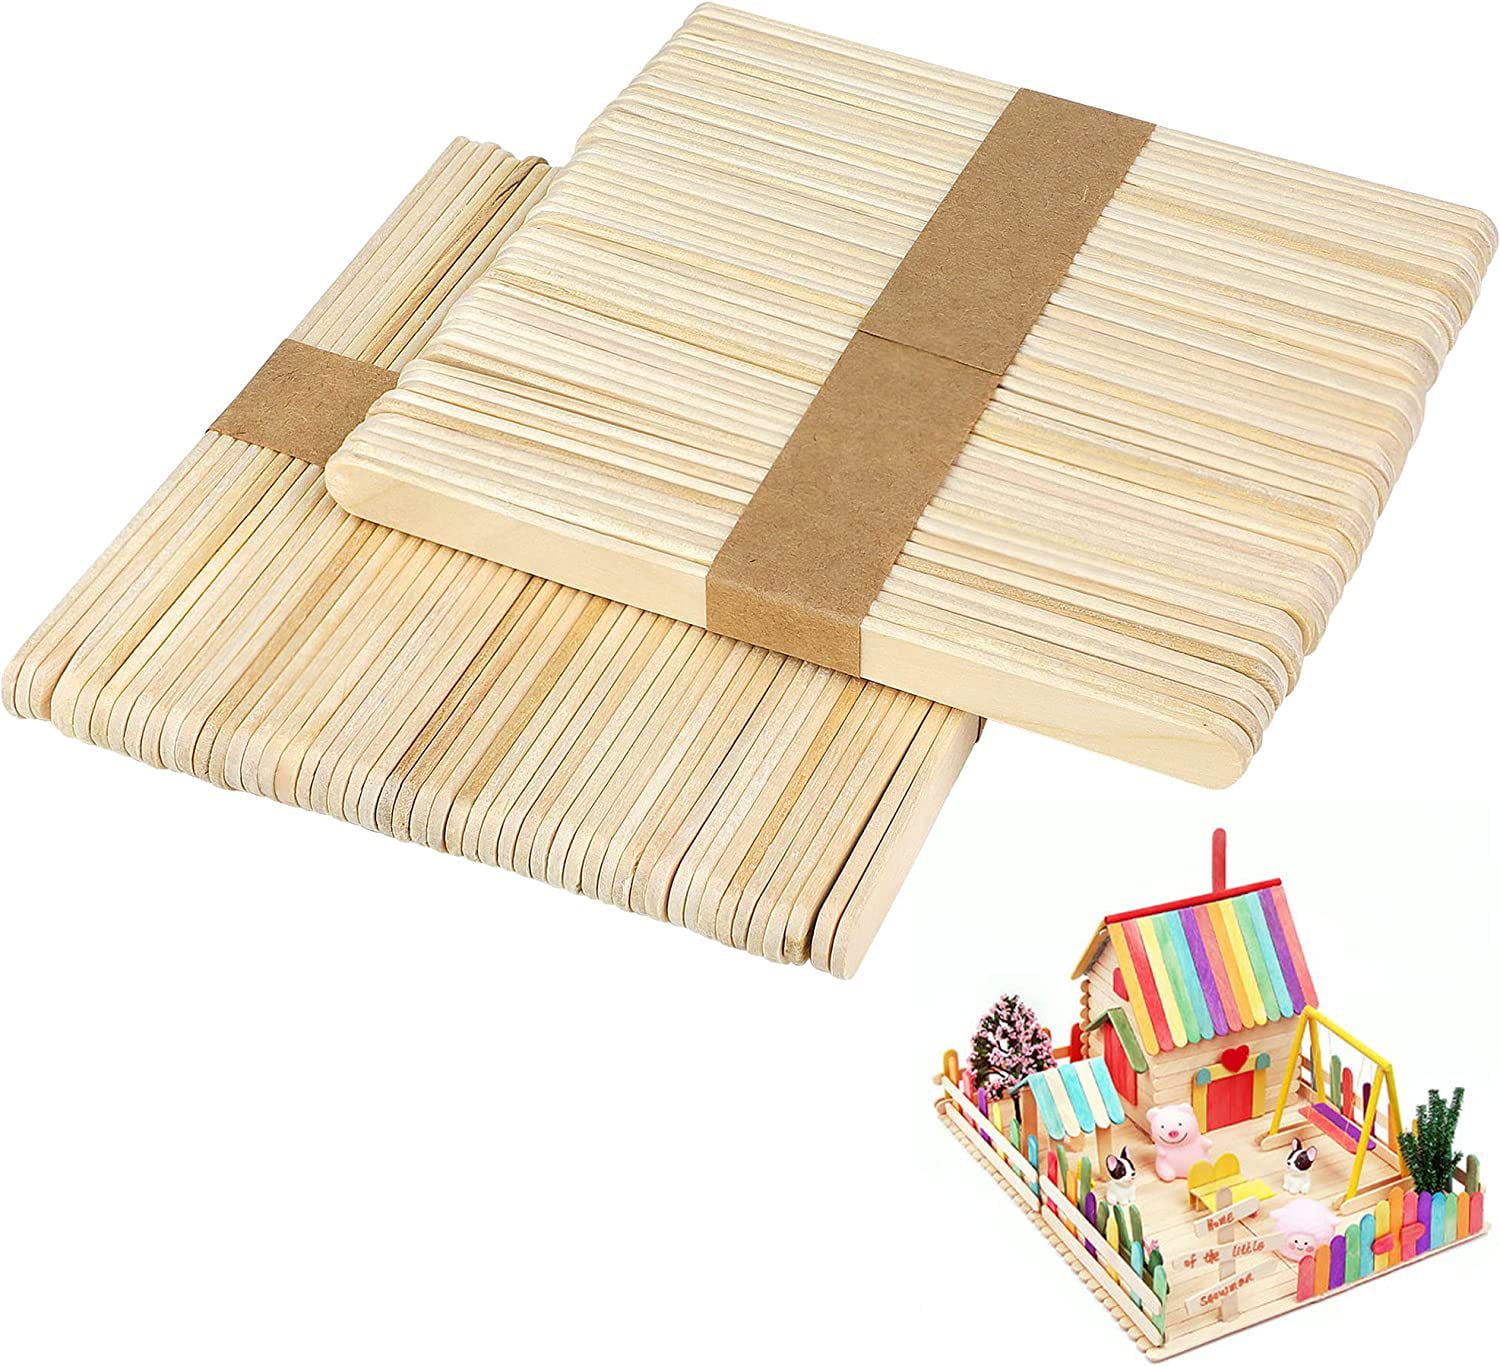 Comfy Package [1000 count] 4.5 inch wooden multi-purpose popsicle sticks  for crafts, ices, ice cream, wax, waxing, tongue depressor wood st